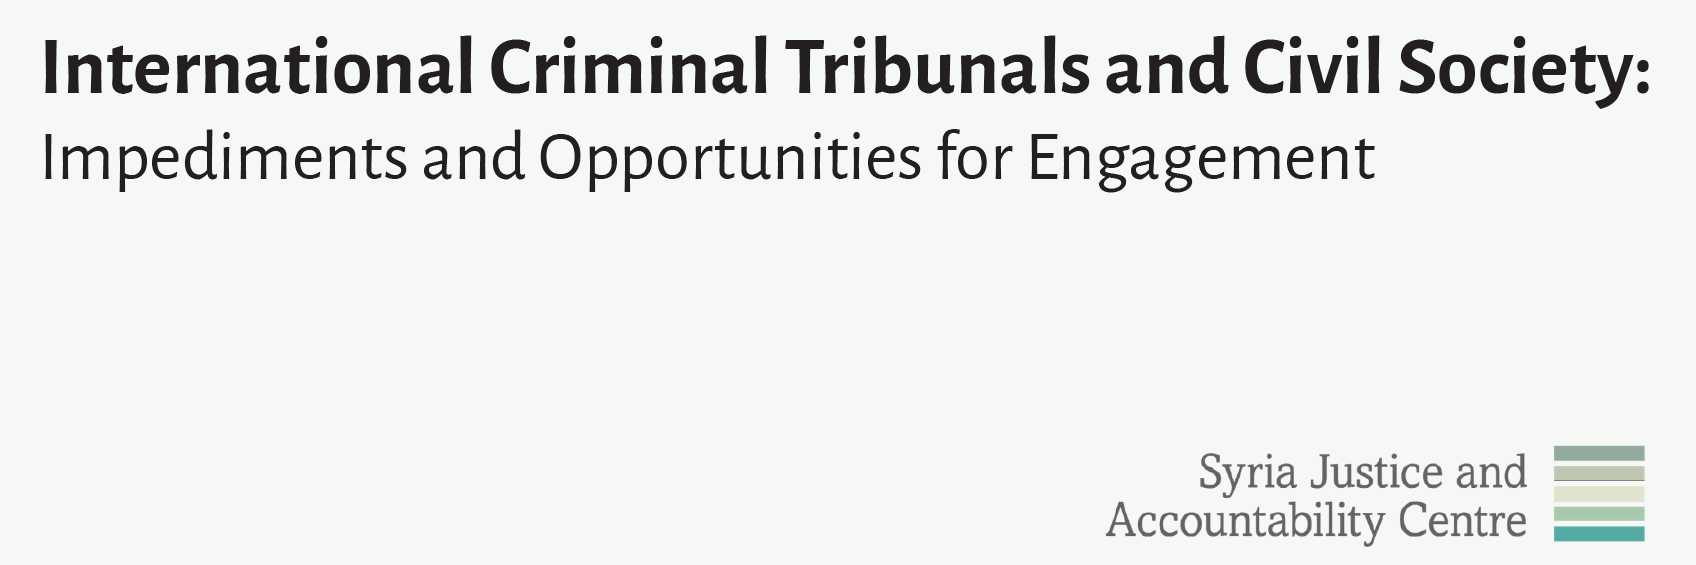 International Criminal Tribunals and Civil Society: Impediments and Opportunities for Engagement